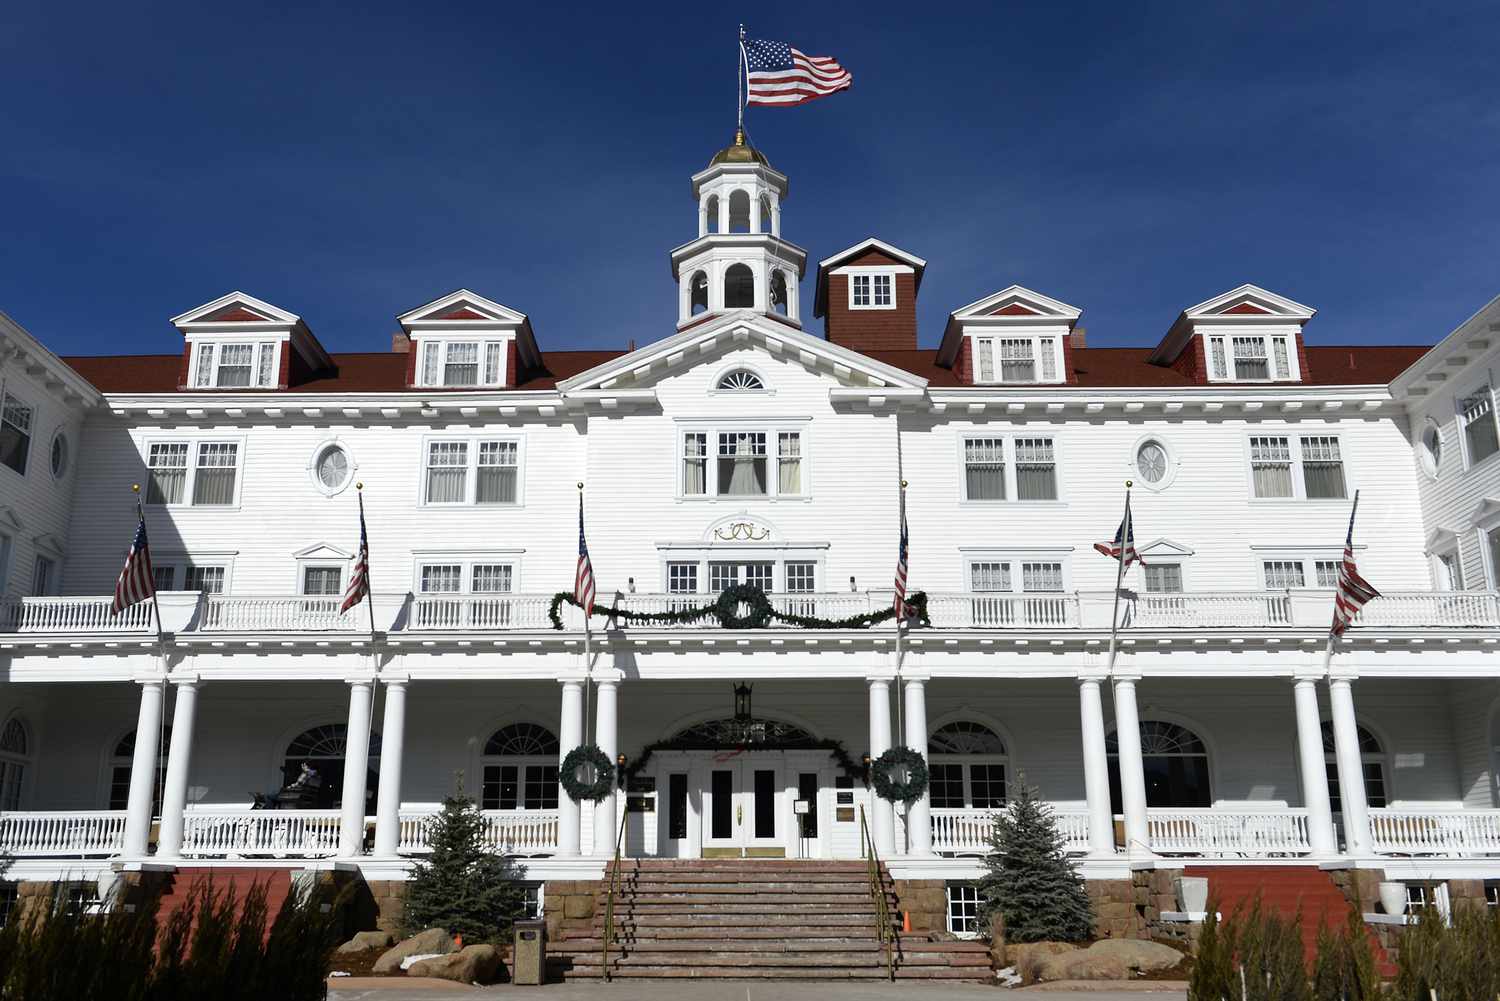 The beautiful Stanley Hotel is pictured from the front on January 12, 2016 in Estes Park, Colorado.